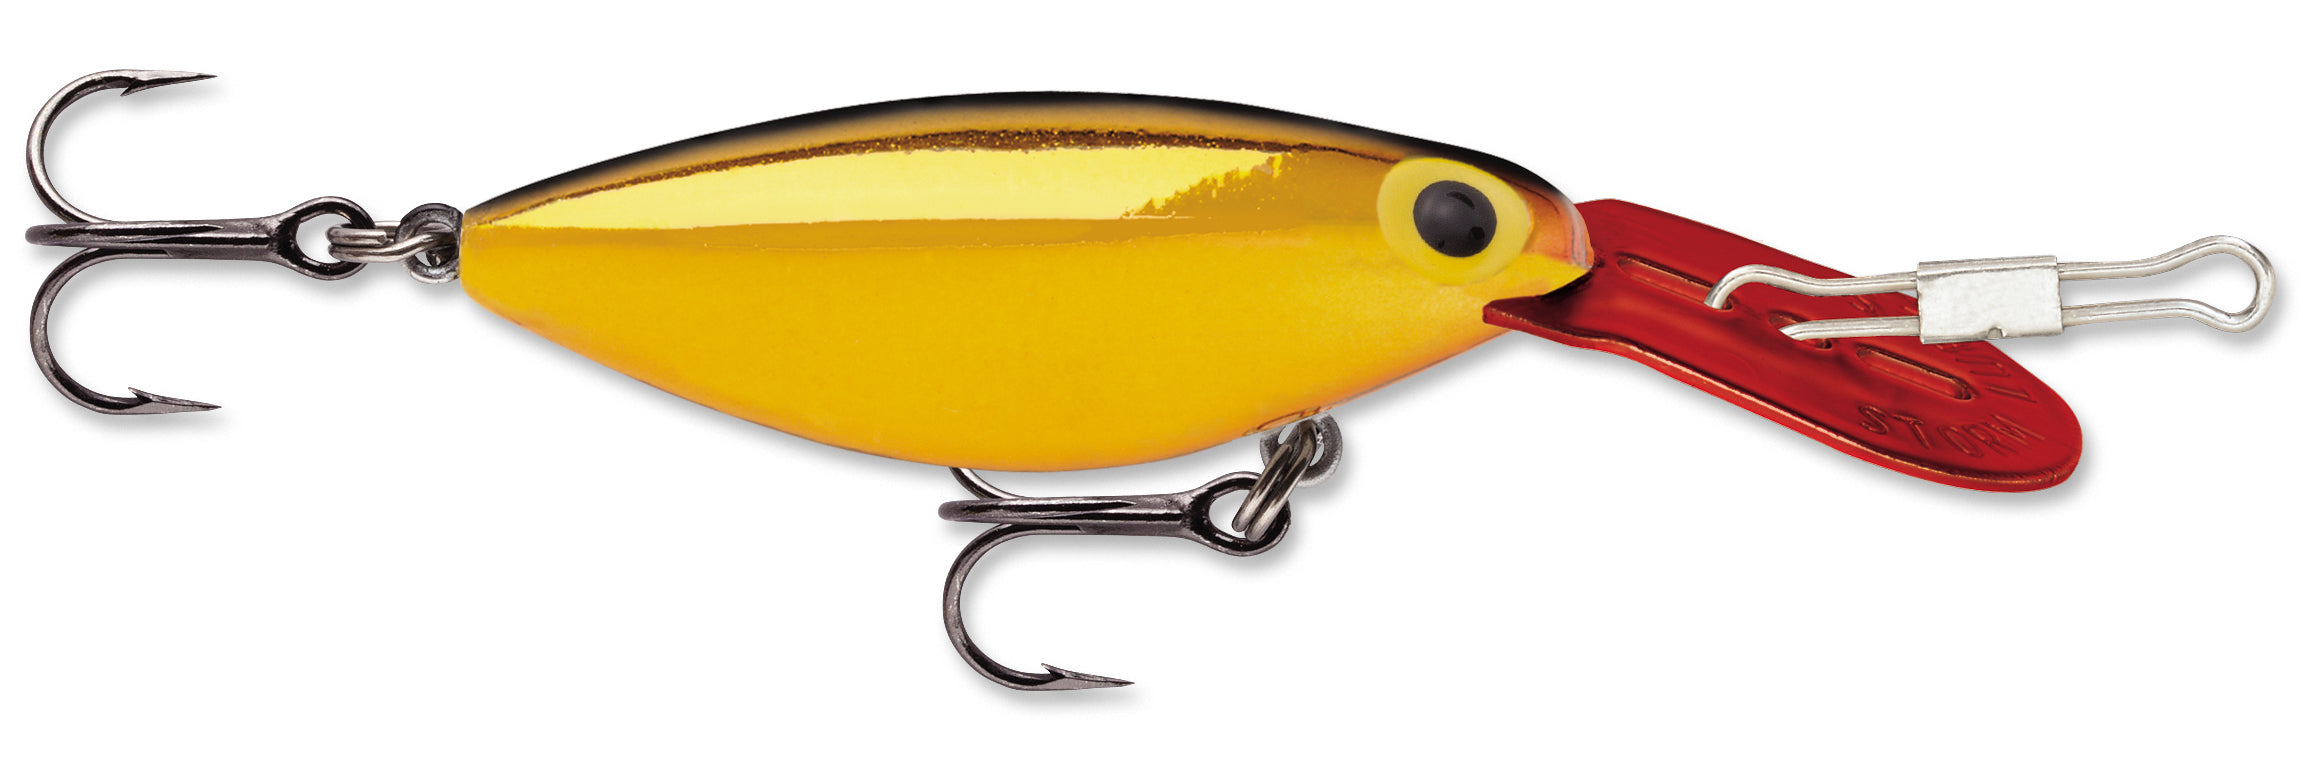 Storm Original Hot 'n Tot 2-1/2, Metallic Blue Scale/Red Lip, Wild  searching action. Great for trolling walleye 